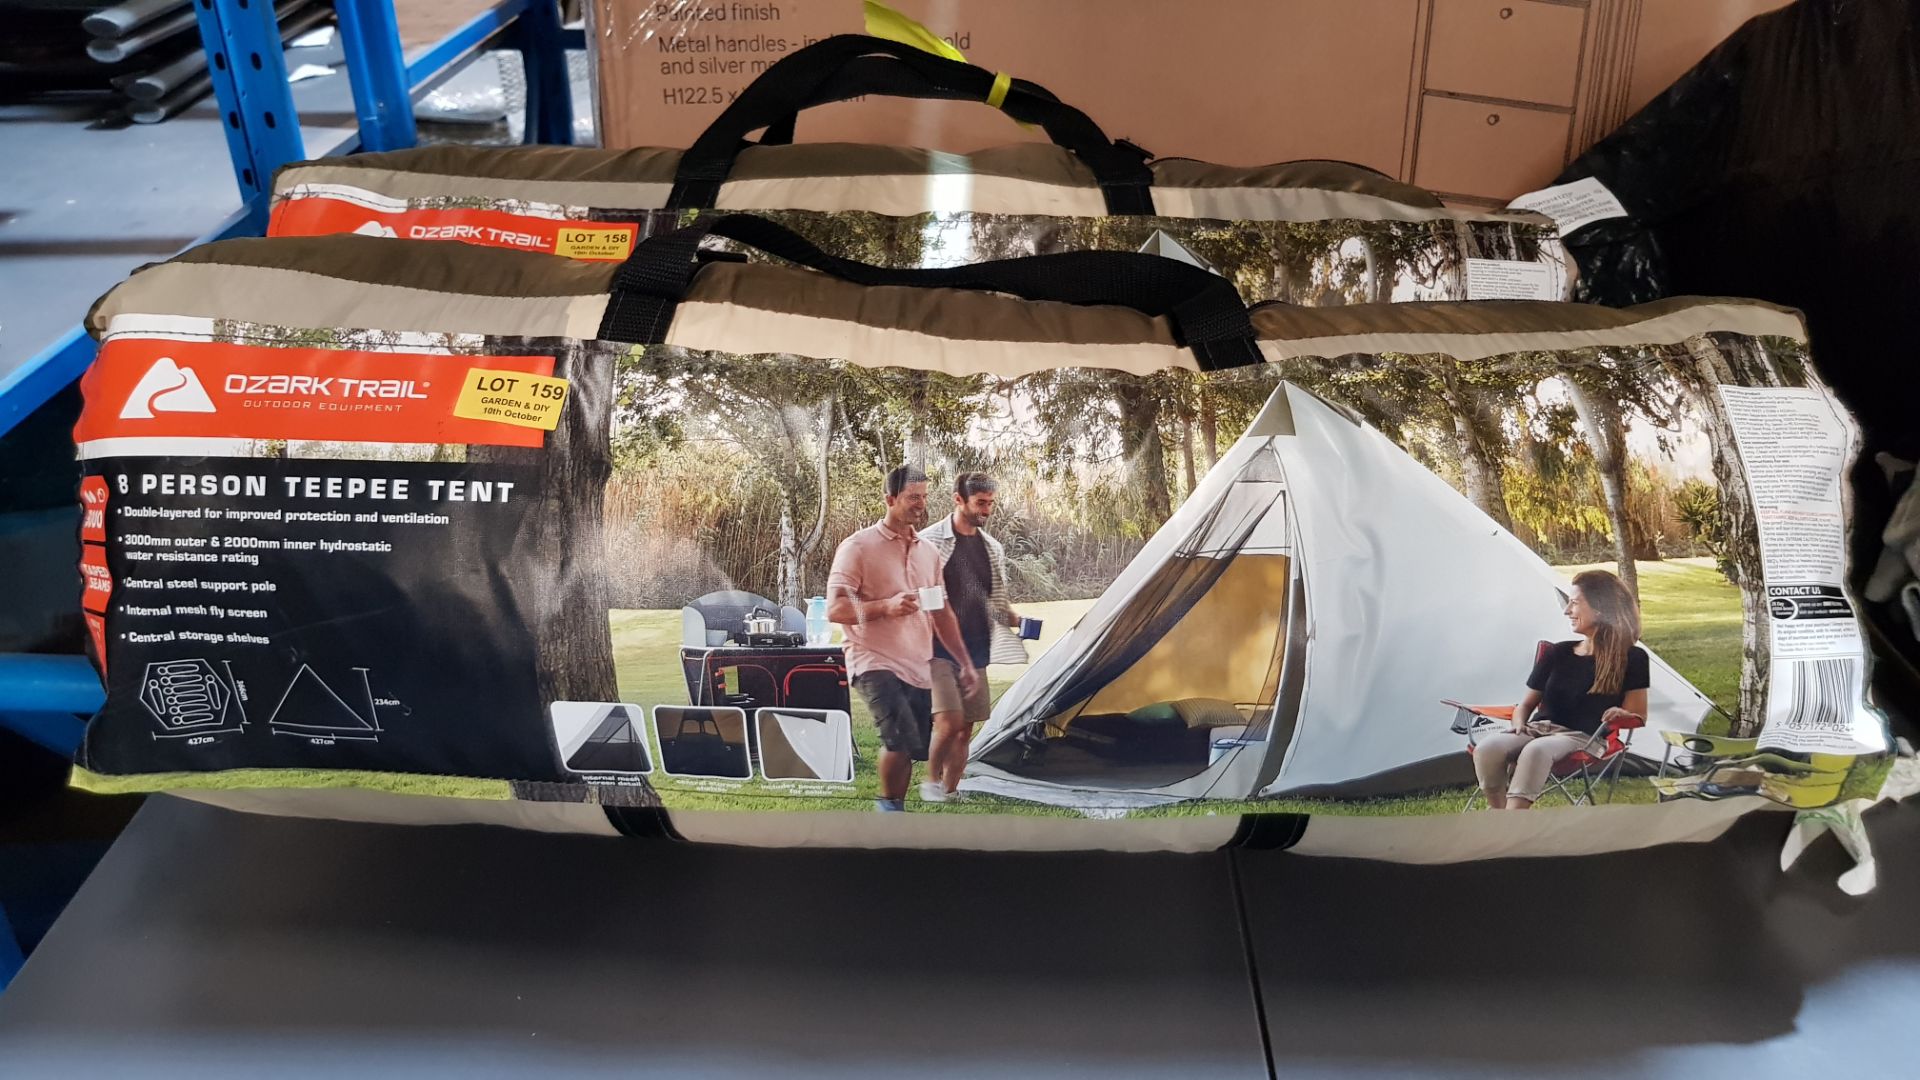 (2K) 1x Ozark Trail 8 Person Teepee Tent RRP £89. (Contents Not Checked). - Image 5 of 5